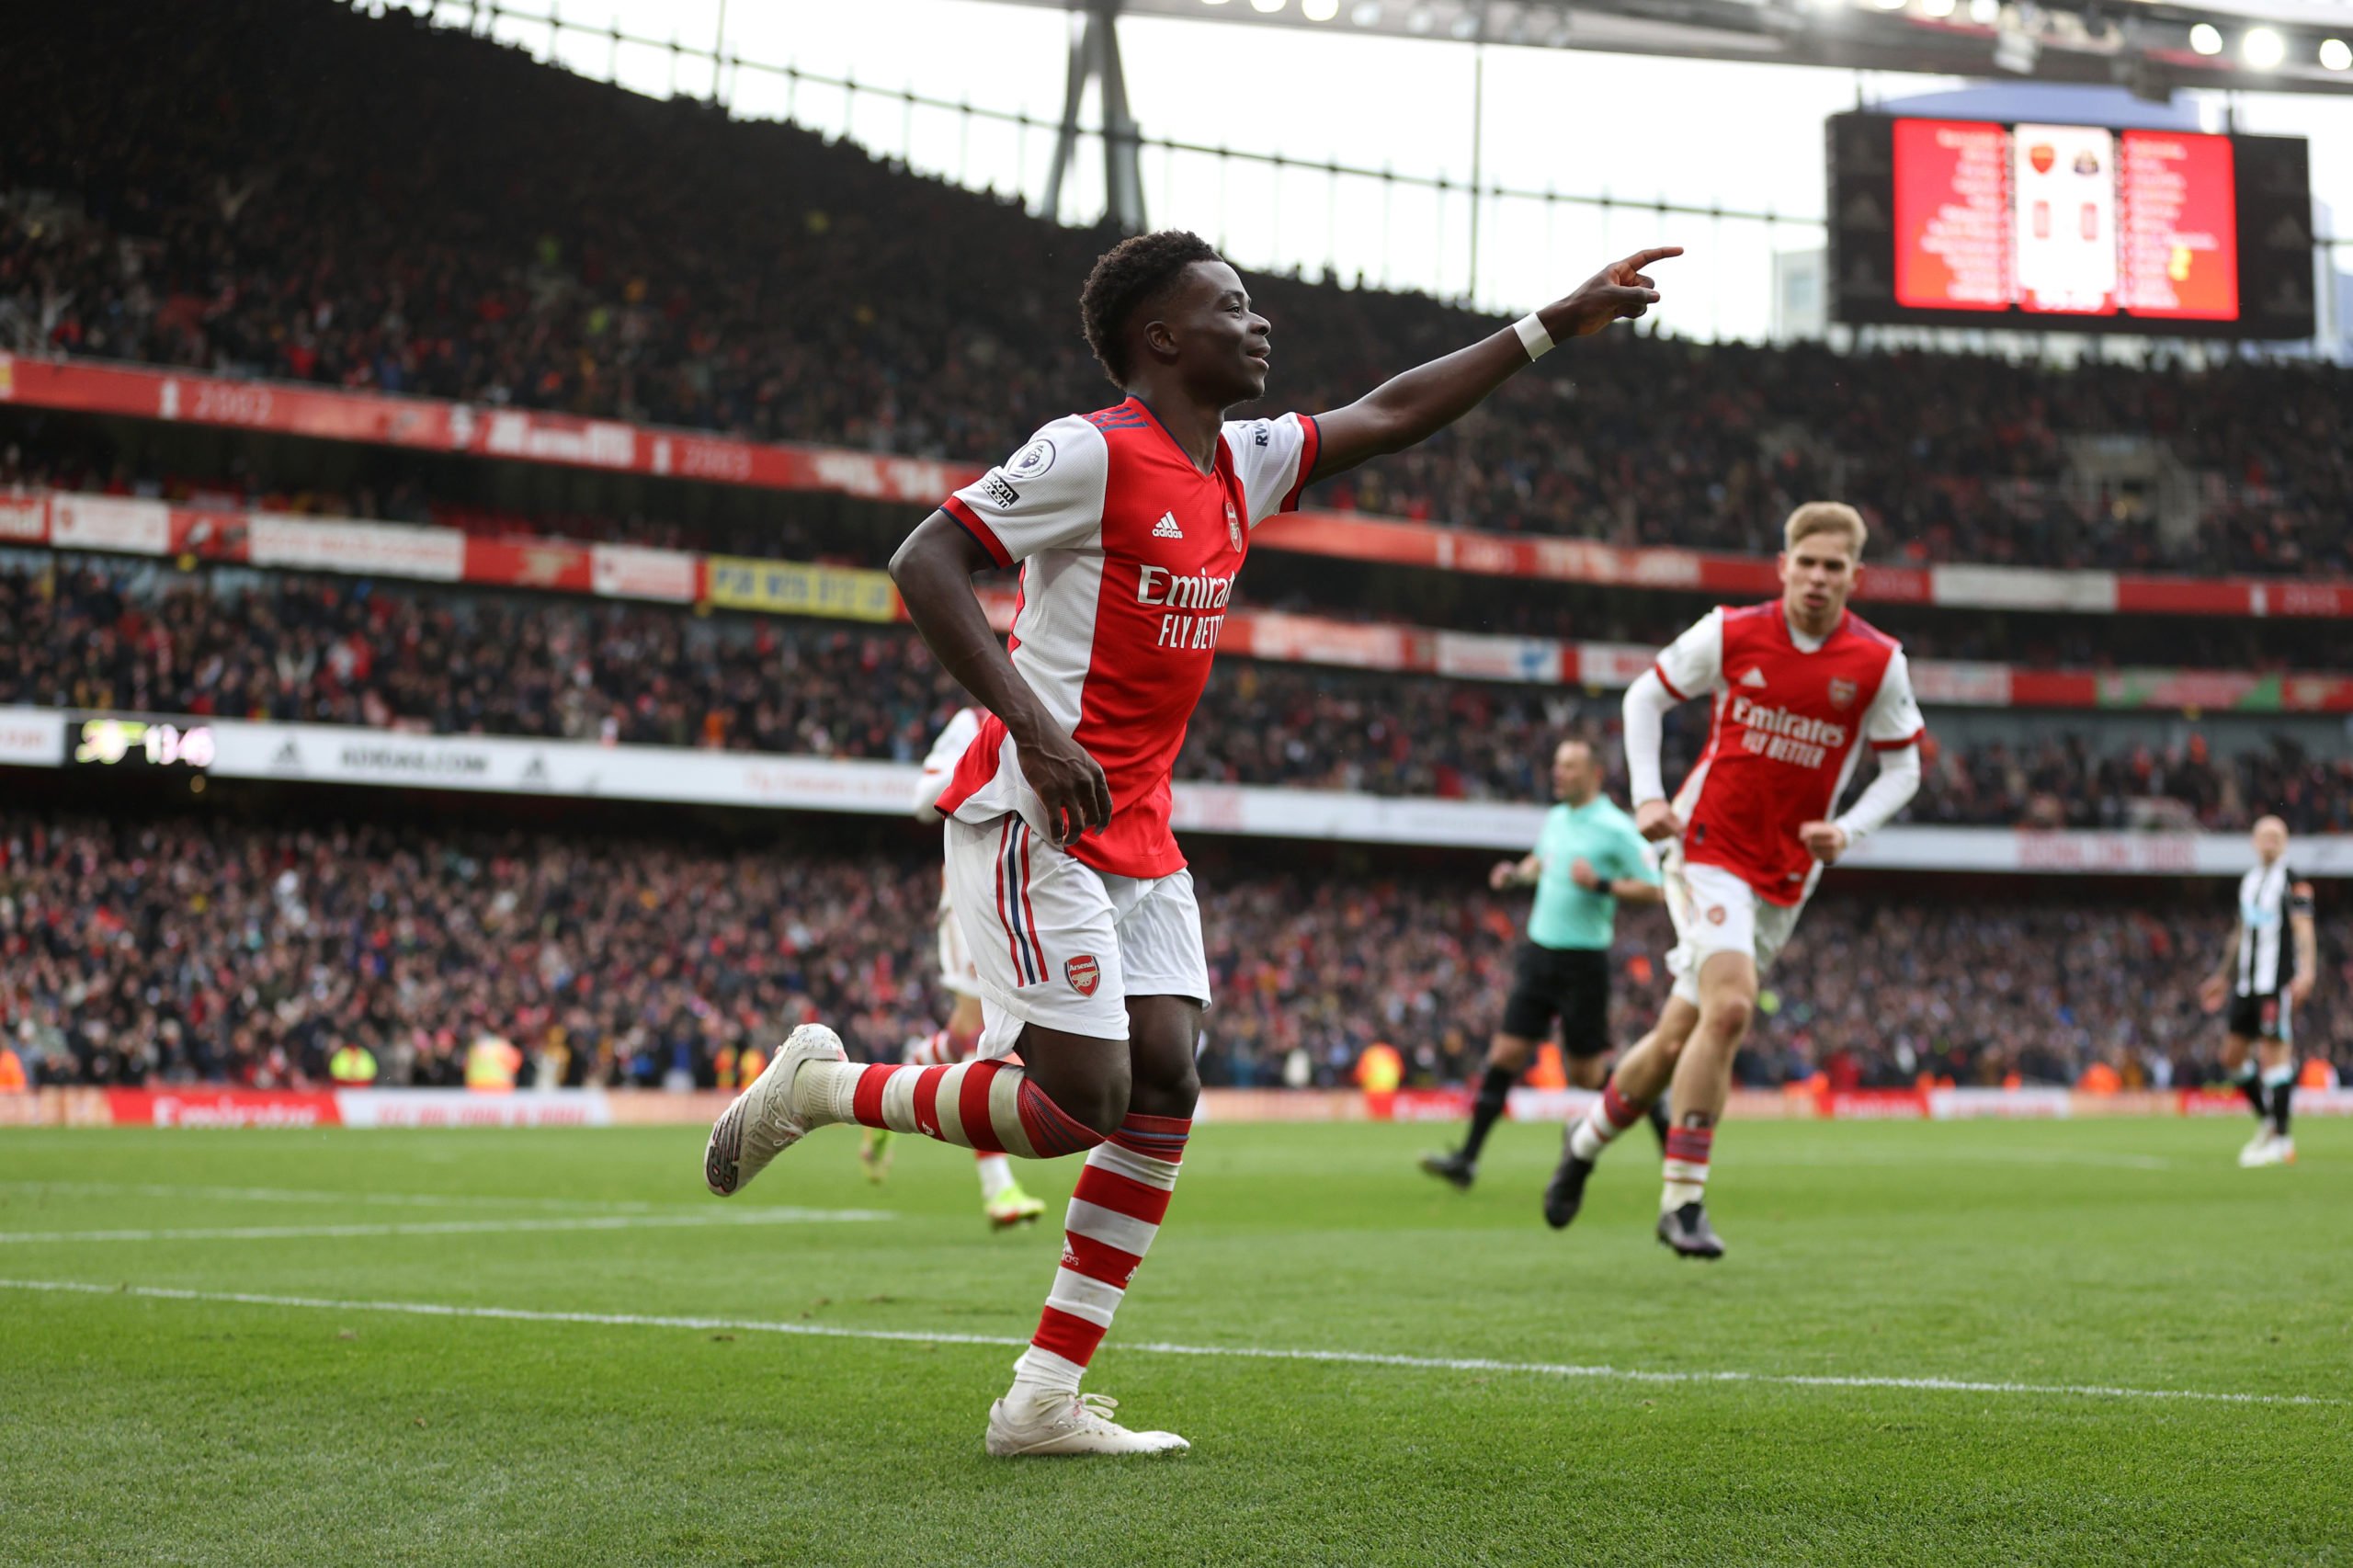 LONDON, ENGLAND - NOVEMBER 27: Bukayo Saka of Arsenal celebrates after scoring their team's first goal during the Premier League match between Arsenal and Newcastle United at Emirates Stadium on November 27, 2021 in London, England. (Photo by Richard Heathcote/Getty Images)The 4th Official uses images provided by the following image agency: Getty Images (https://www.gettyimages.de/) Imago Images (https://www.imago-images.de/)